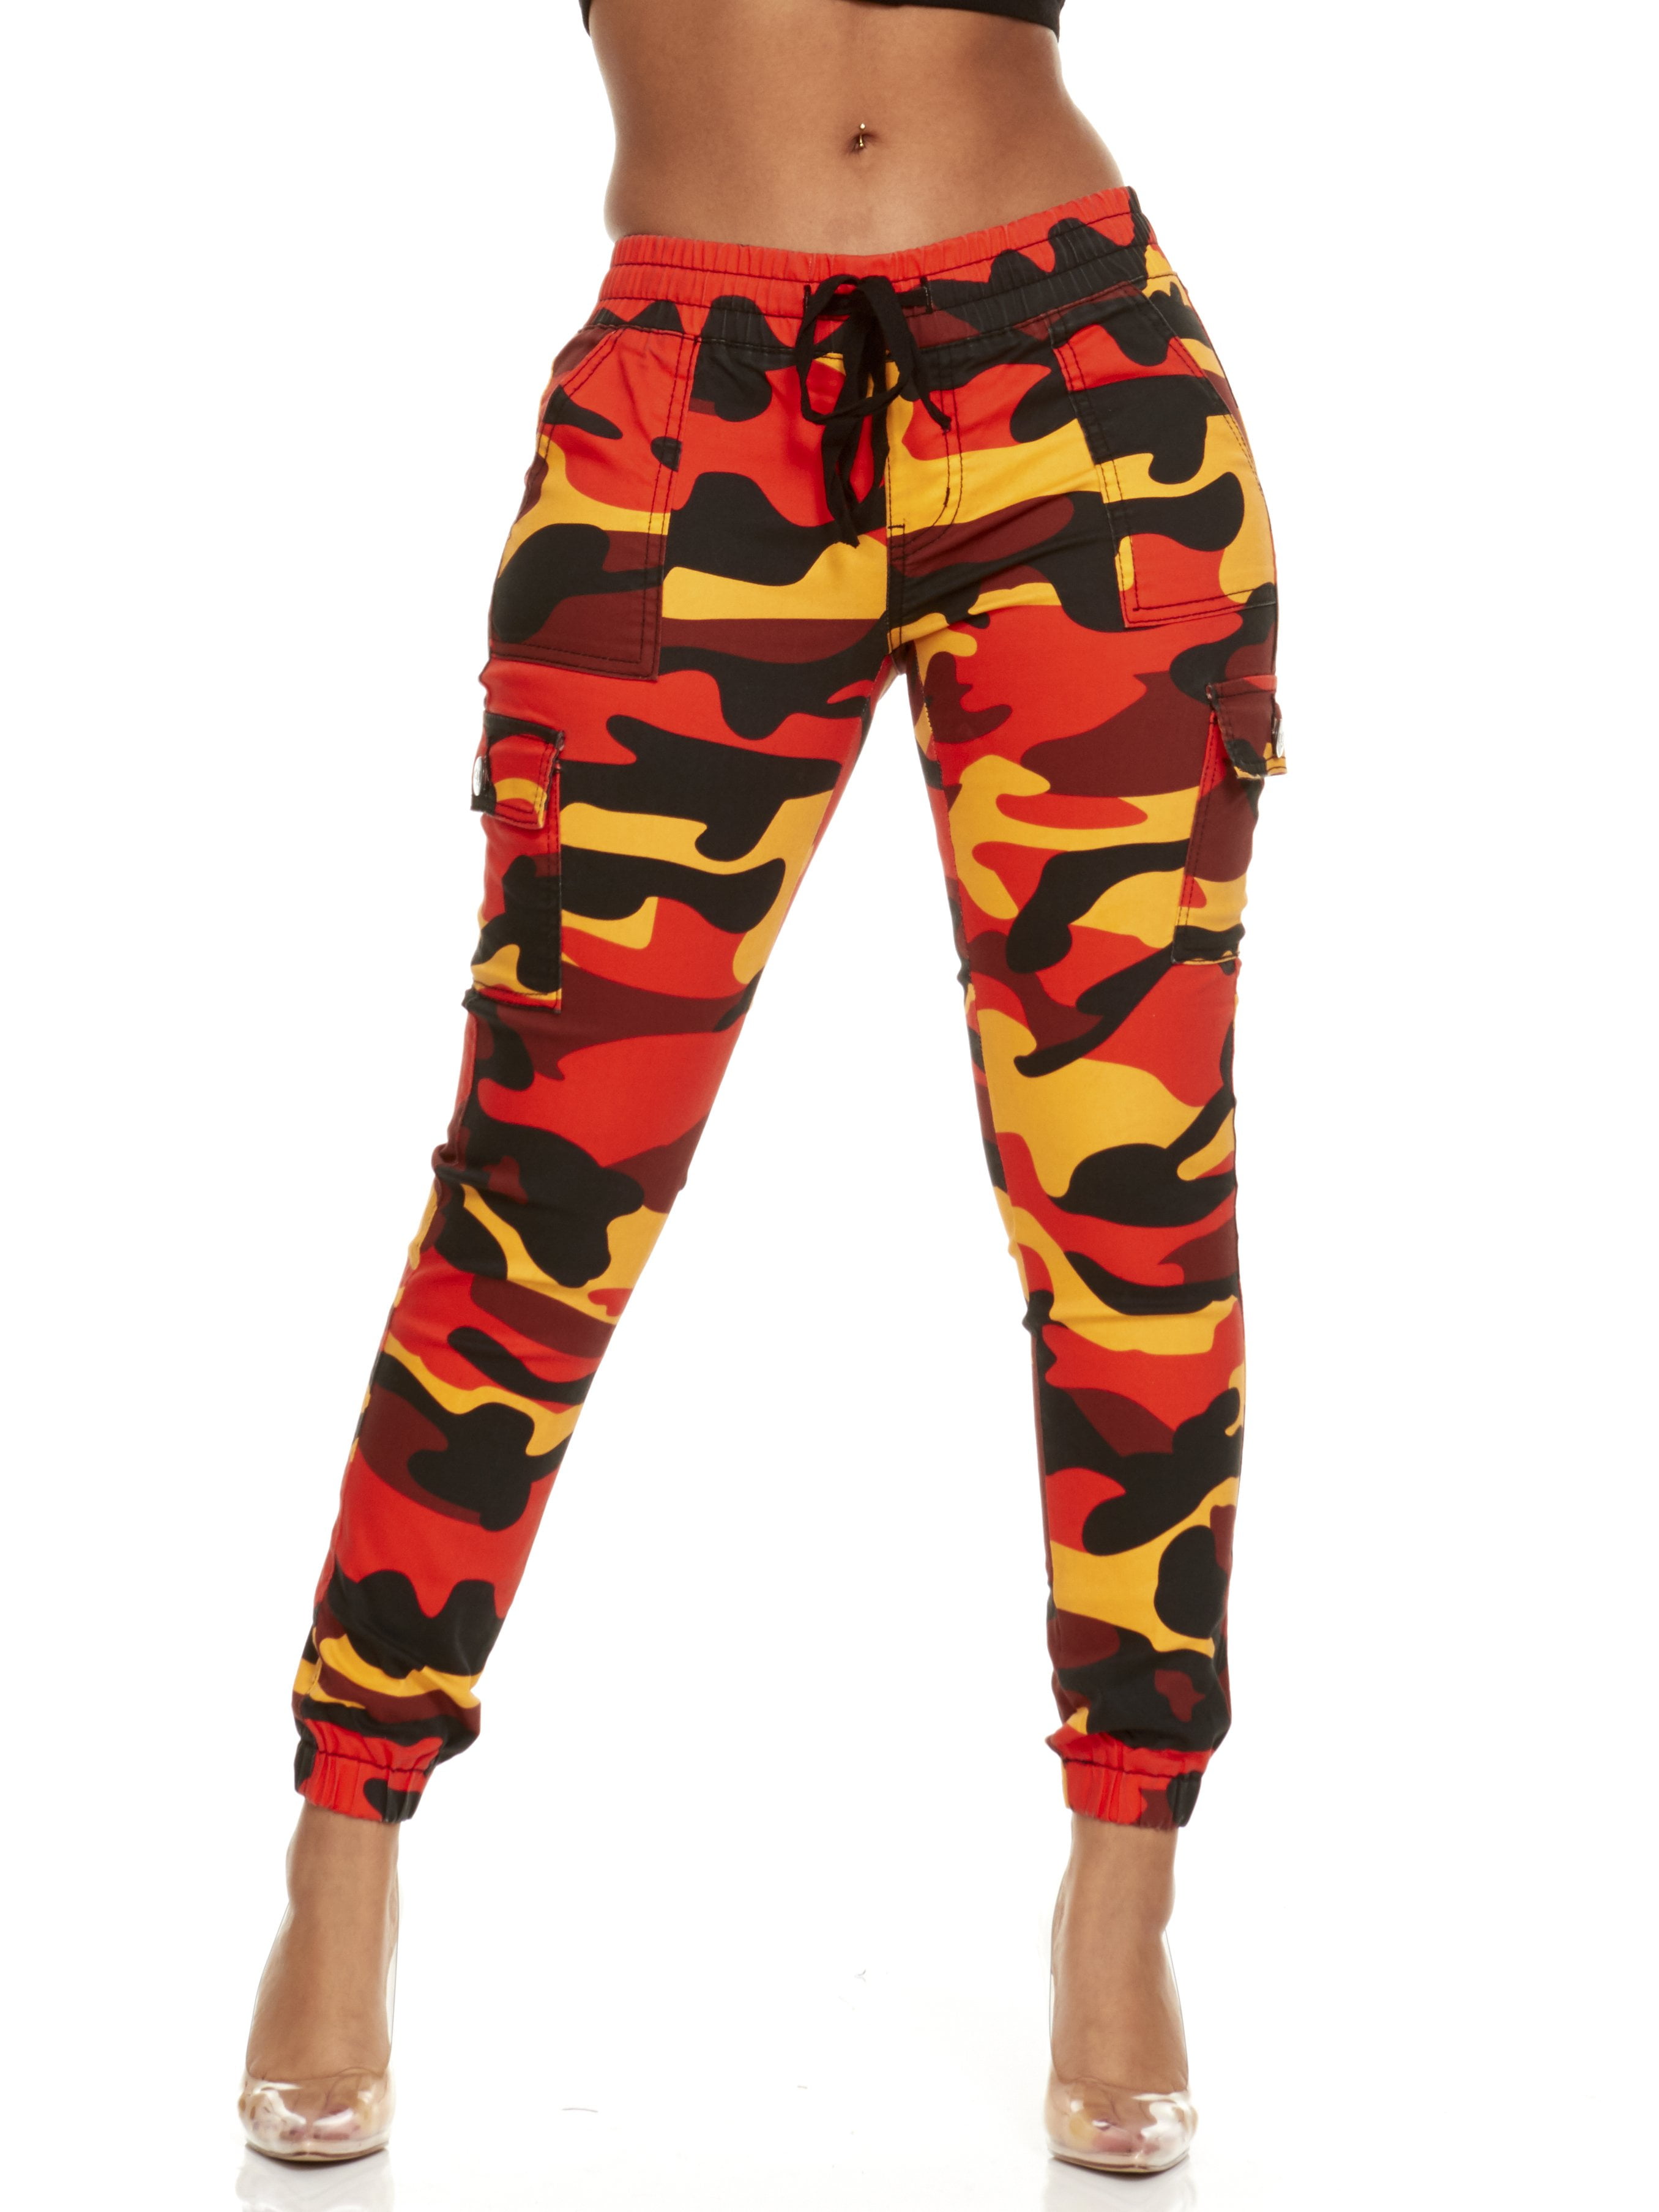 Vry Hot Big Aas Yung Girl Xxxx Video - V.I.P. JEANS Cute Cargo Mid Waisted Jogger Skinny Drawstring Fire Camo Plus  Size 3XL - Walmart.com